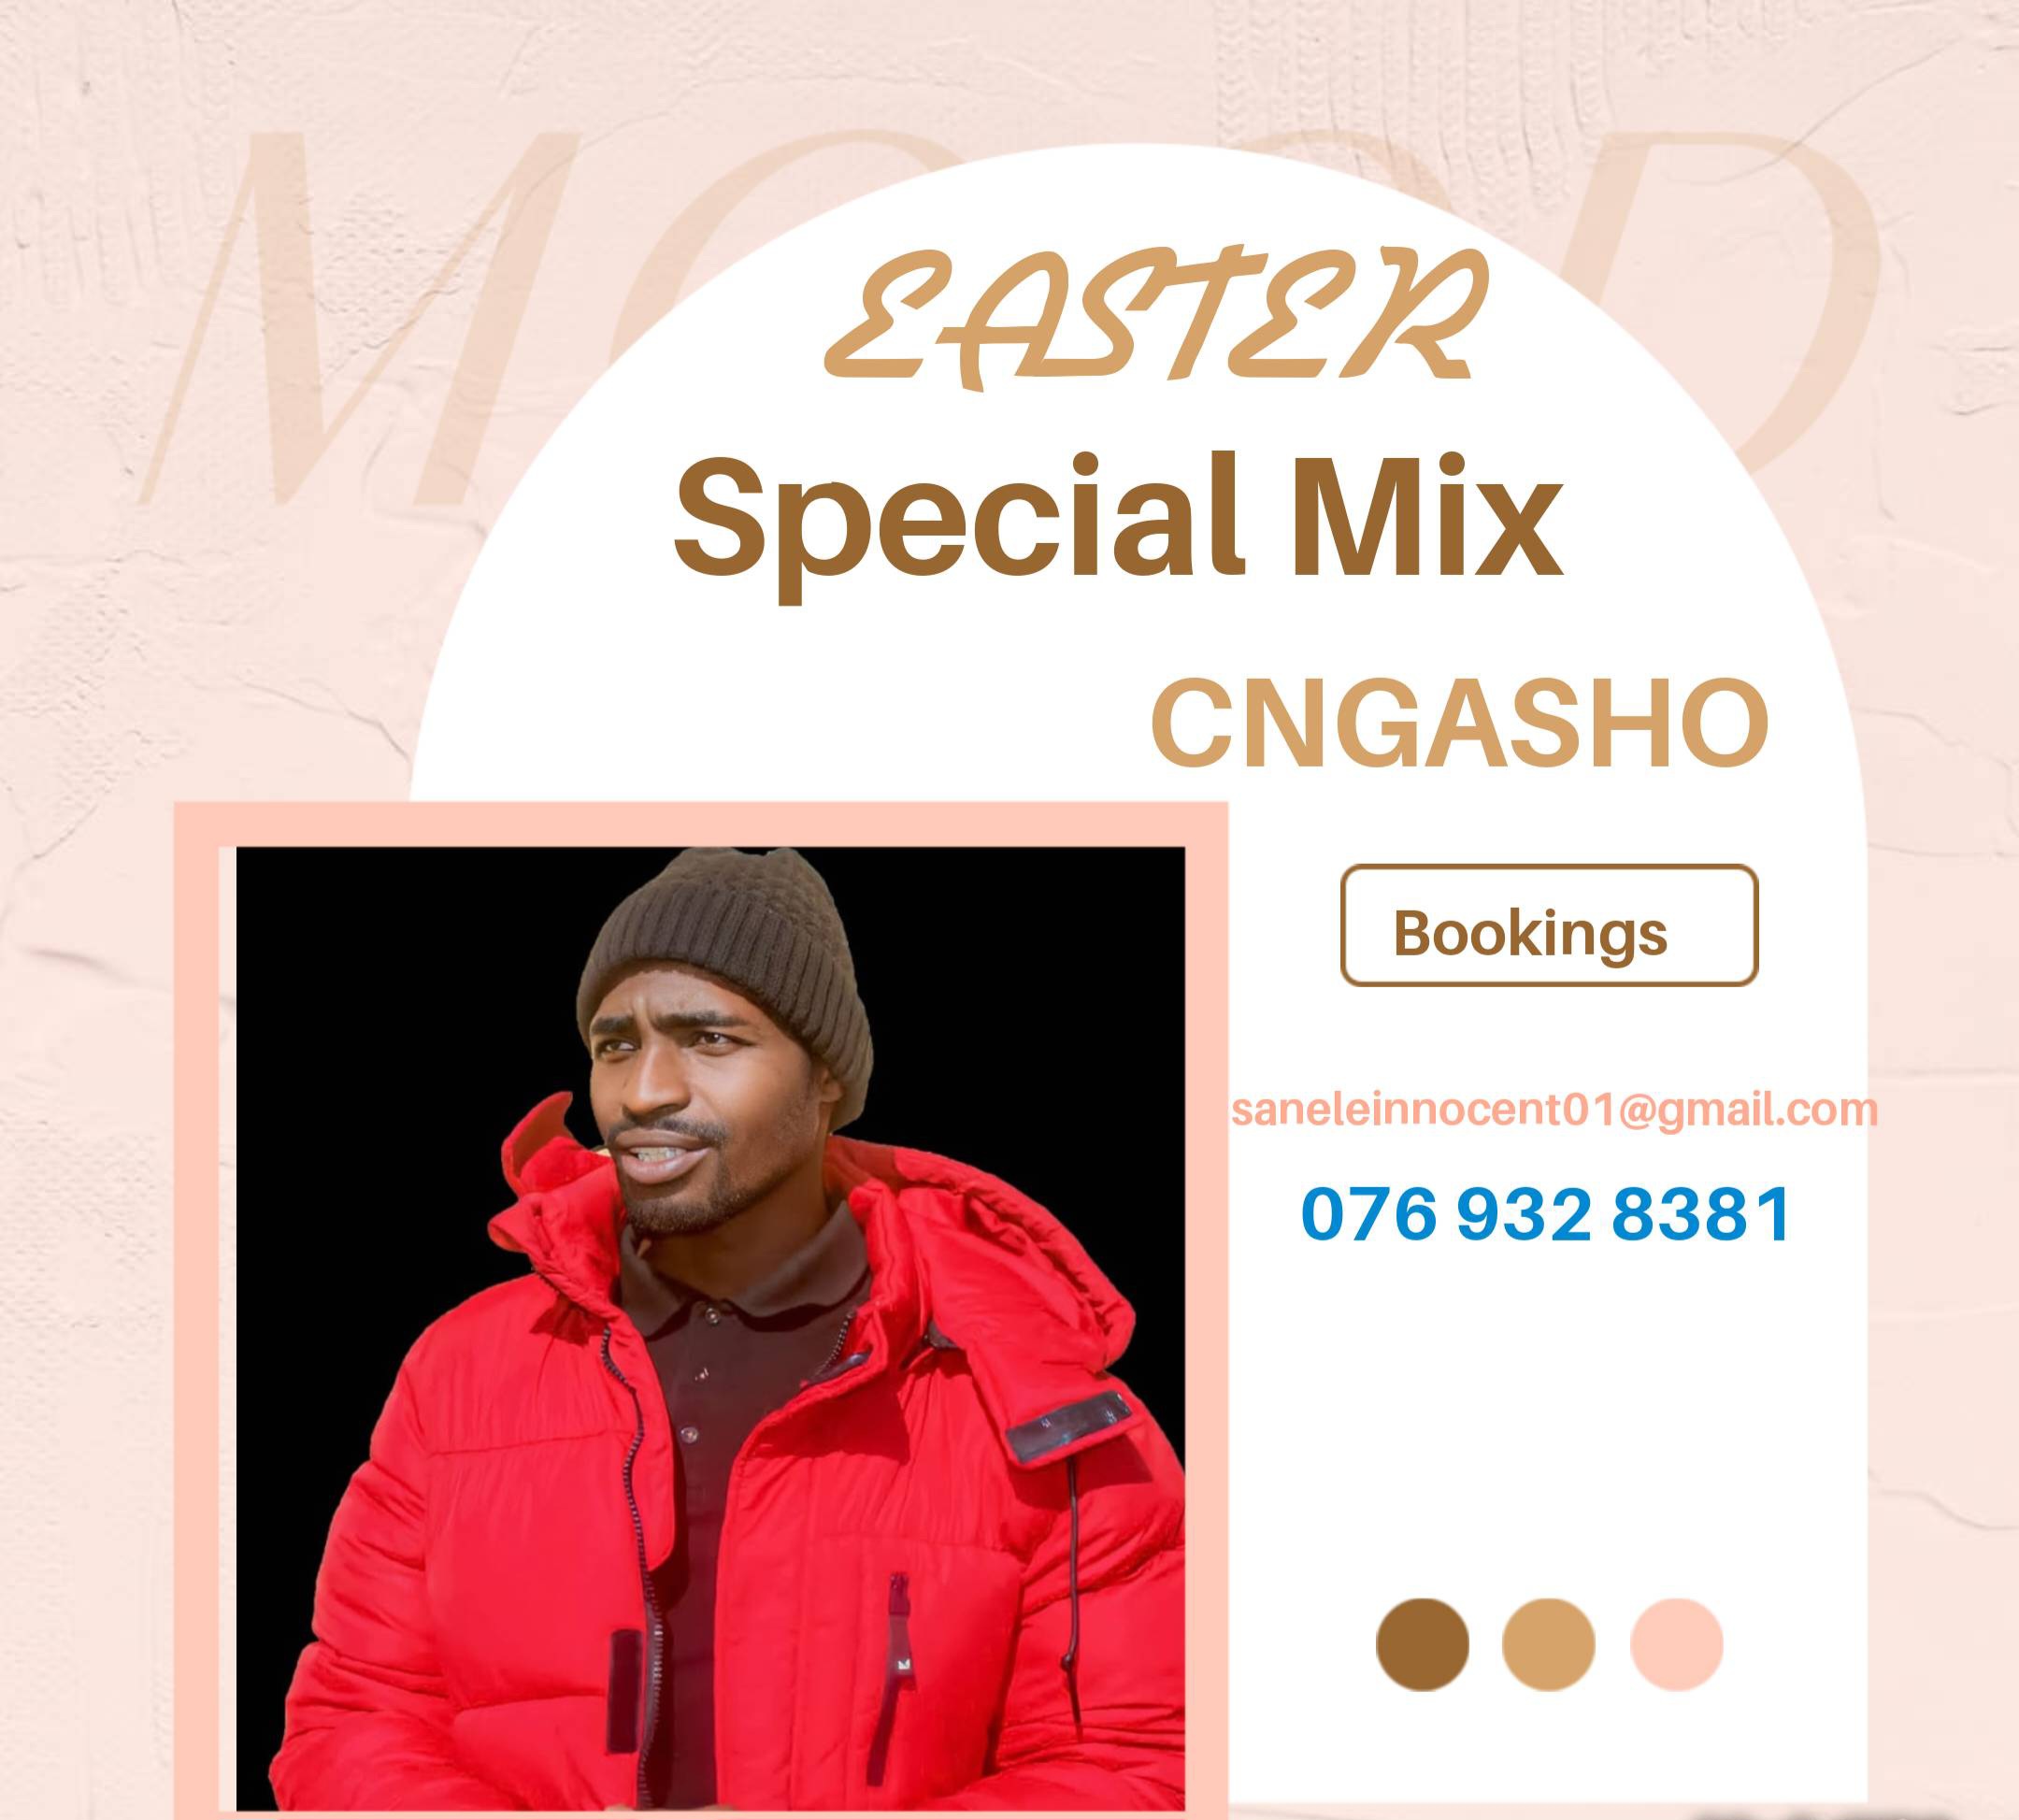 Easter Special Mix - Cngasho